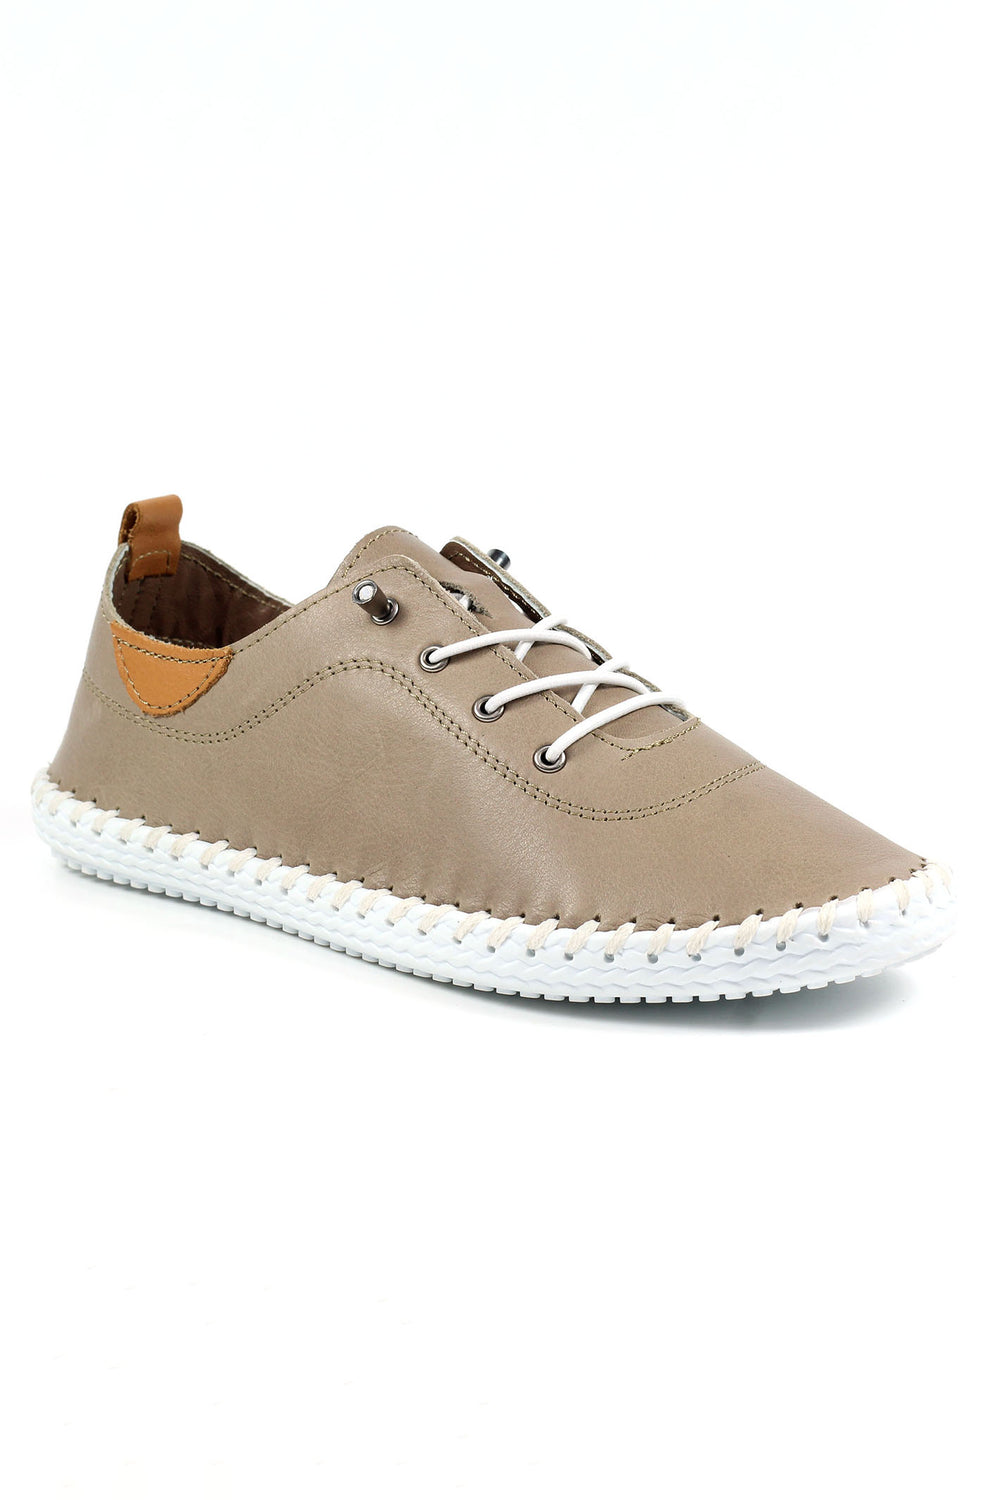 Lunar FLE030 Taupe St Ives Leather Plimsolls - Experience Boutique